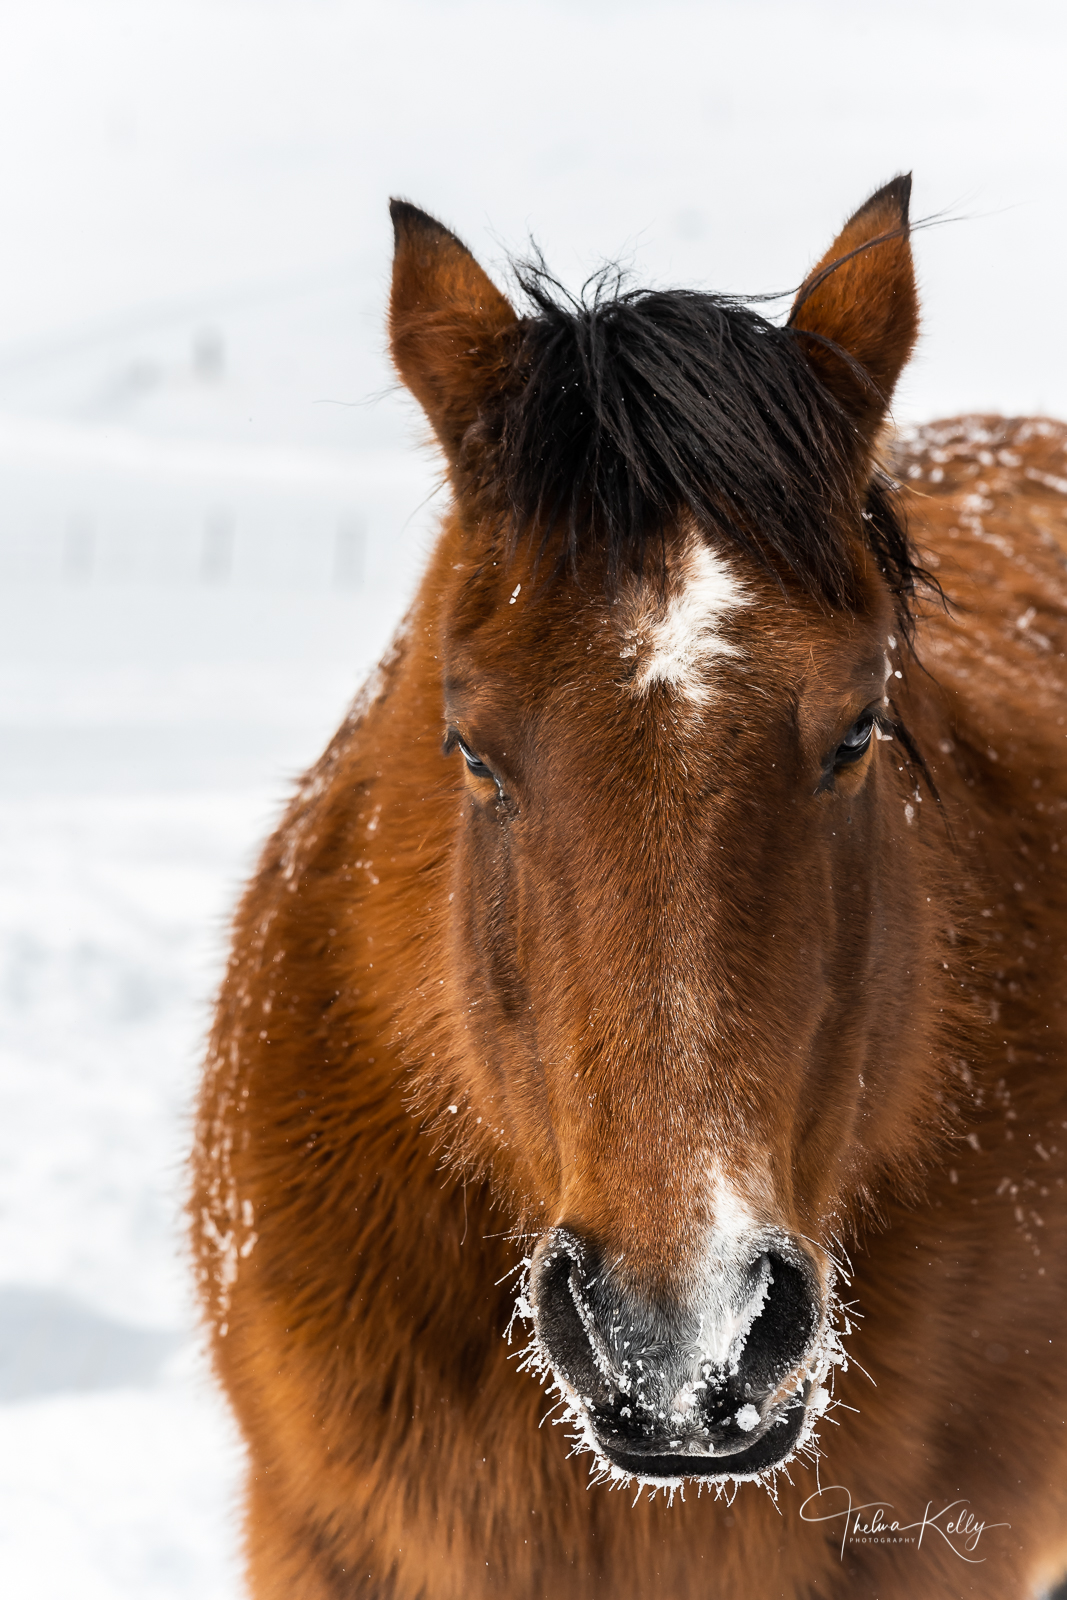 This horse doesn't seem to mind the below zero temperatures!